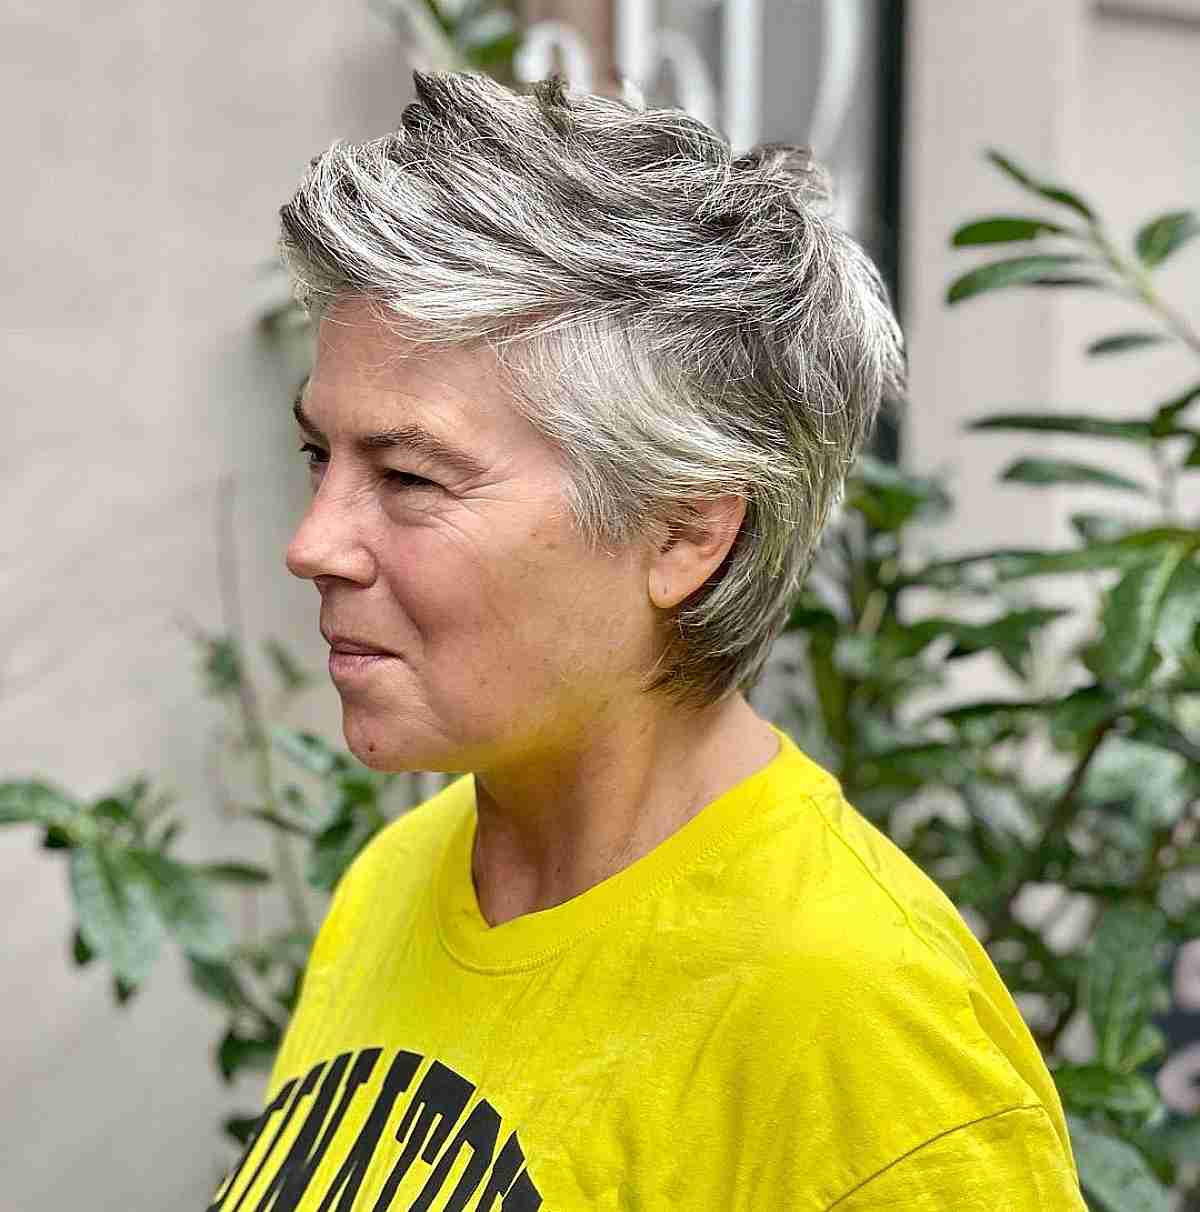 Short Tousled Gray Pixie with Layers for Women Past 50